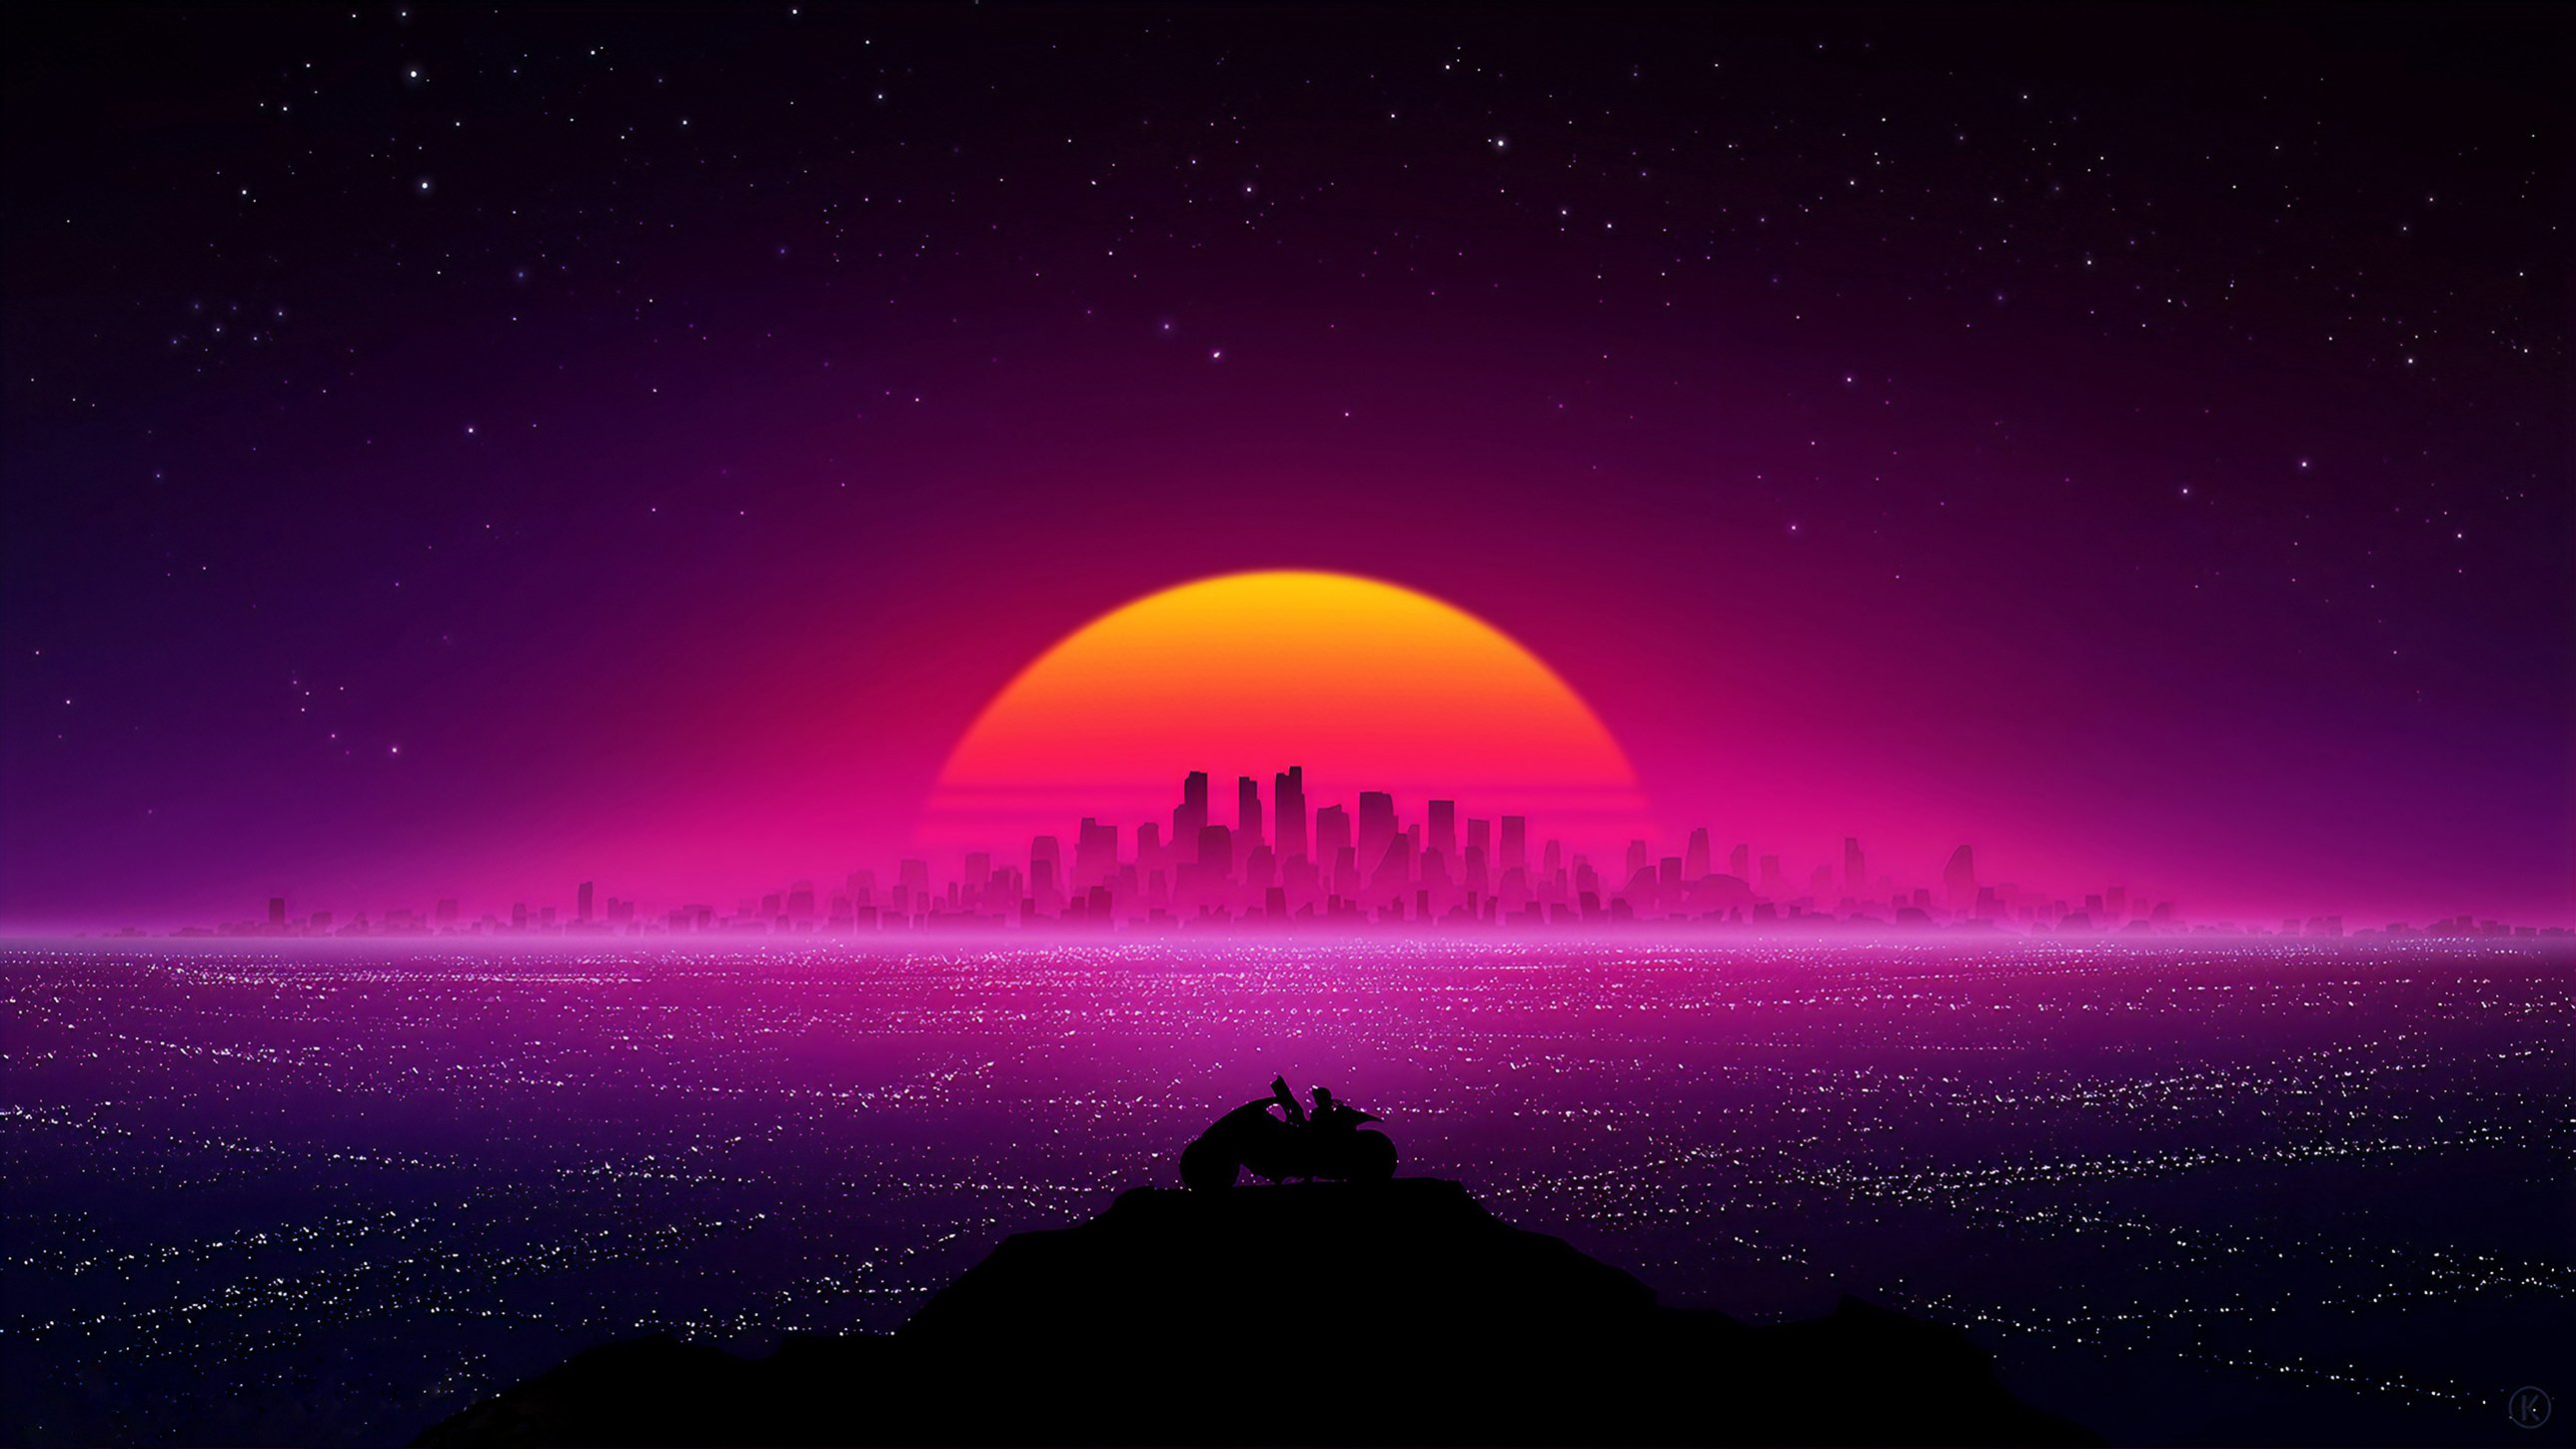 Retro Background Free Image HD Wallpapers